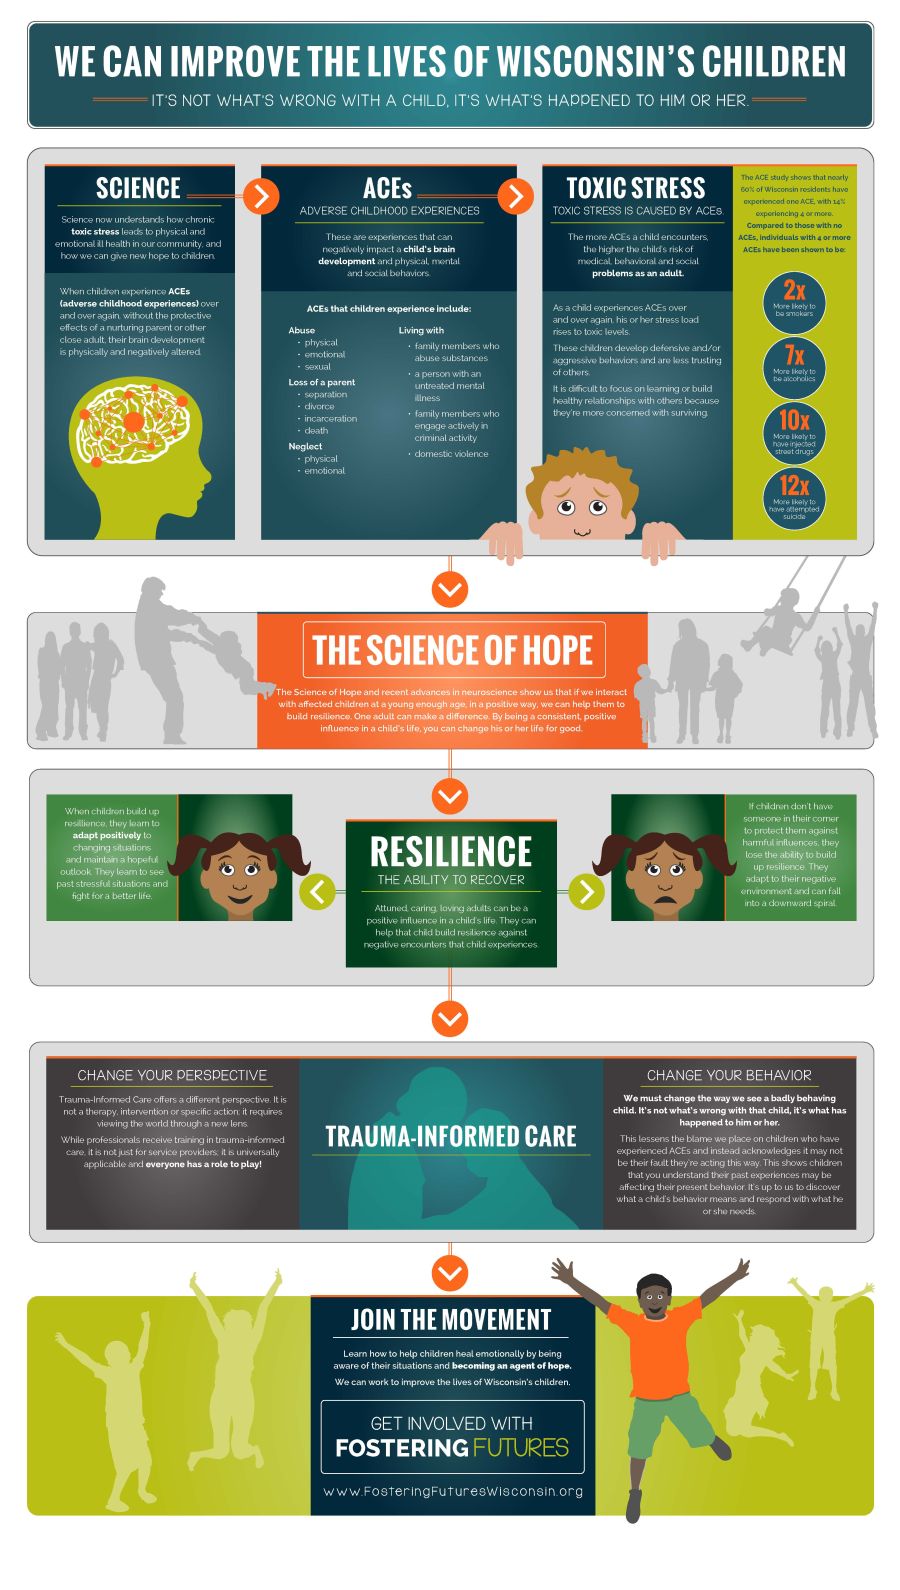 We Can Improve the Lives of Wisconsin Children: Infographic